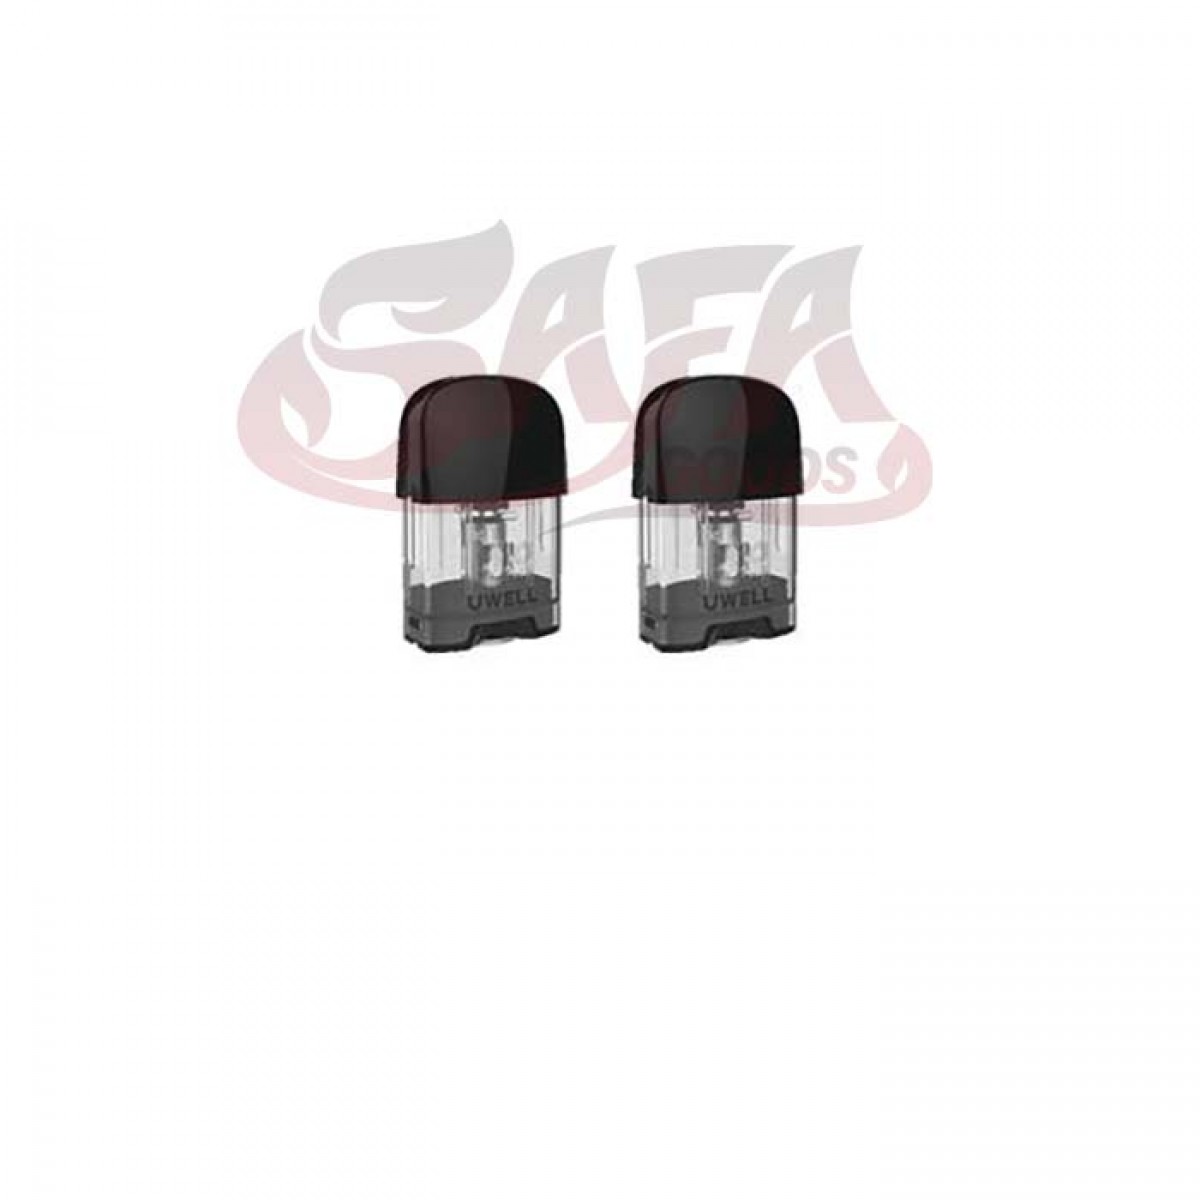 Uwell Caliburn G Pods with Coils - 2PC